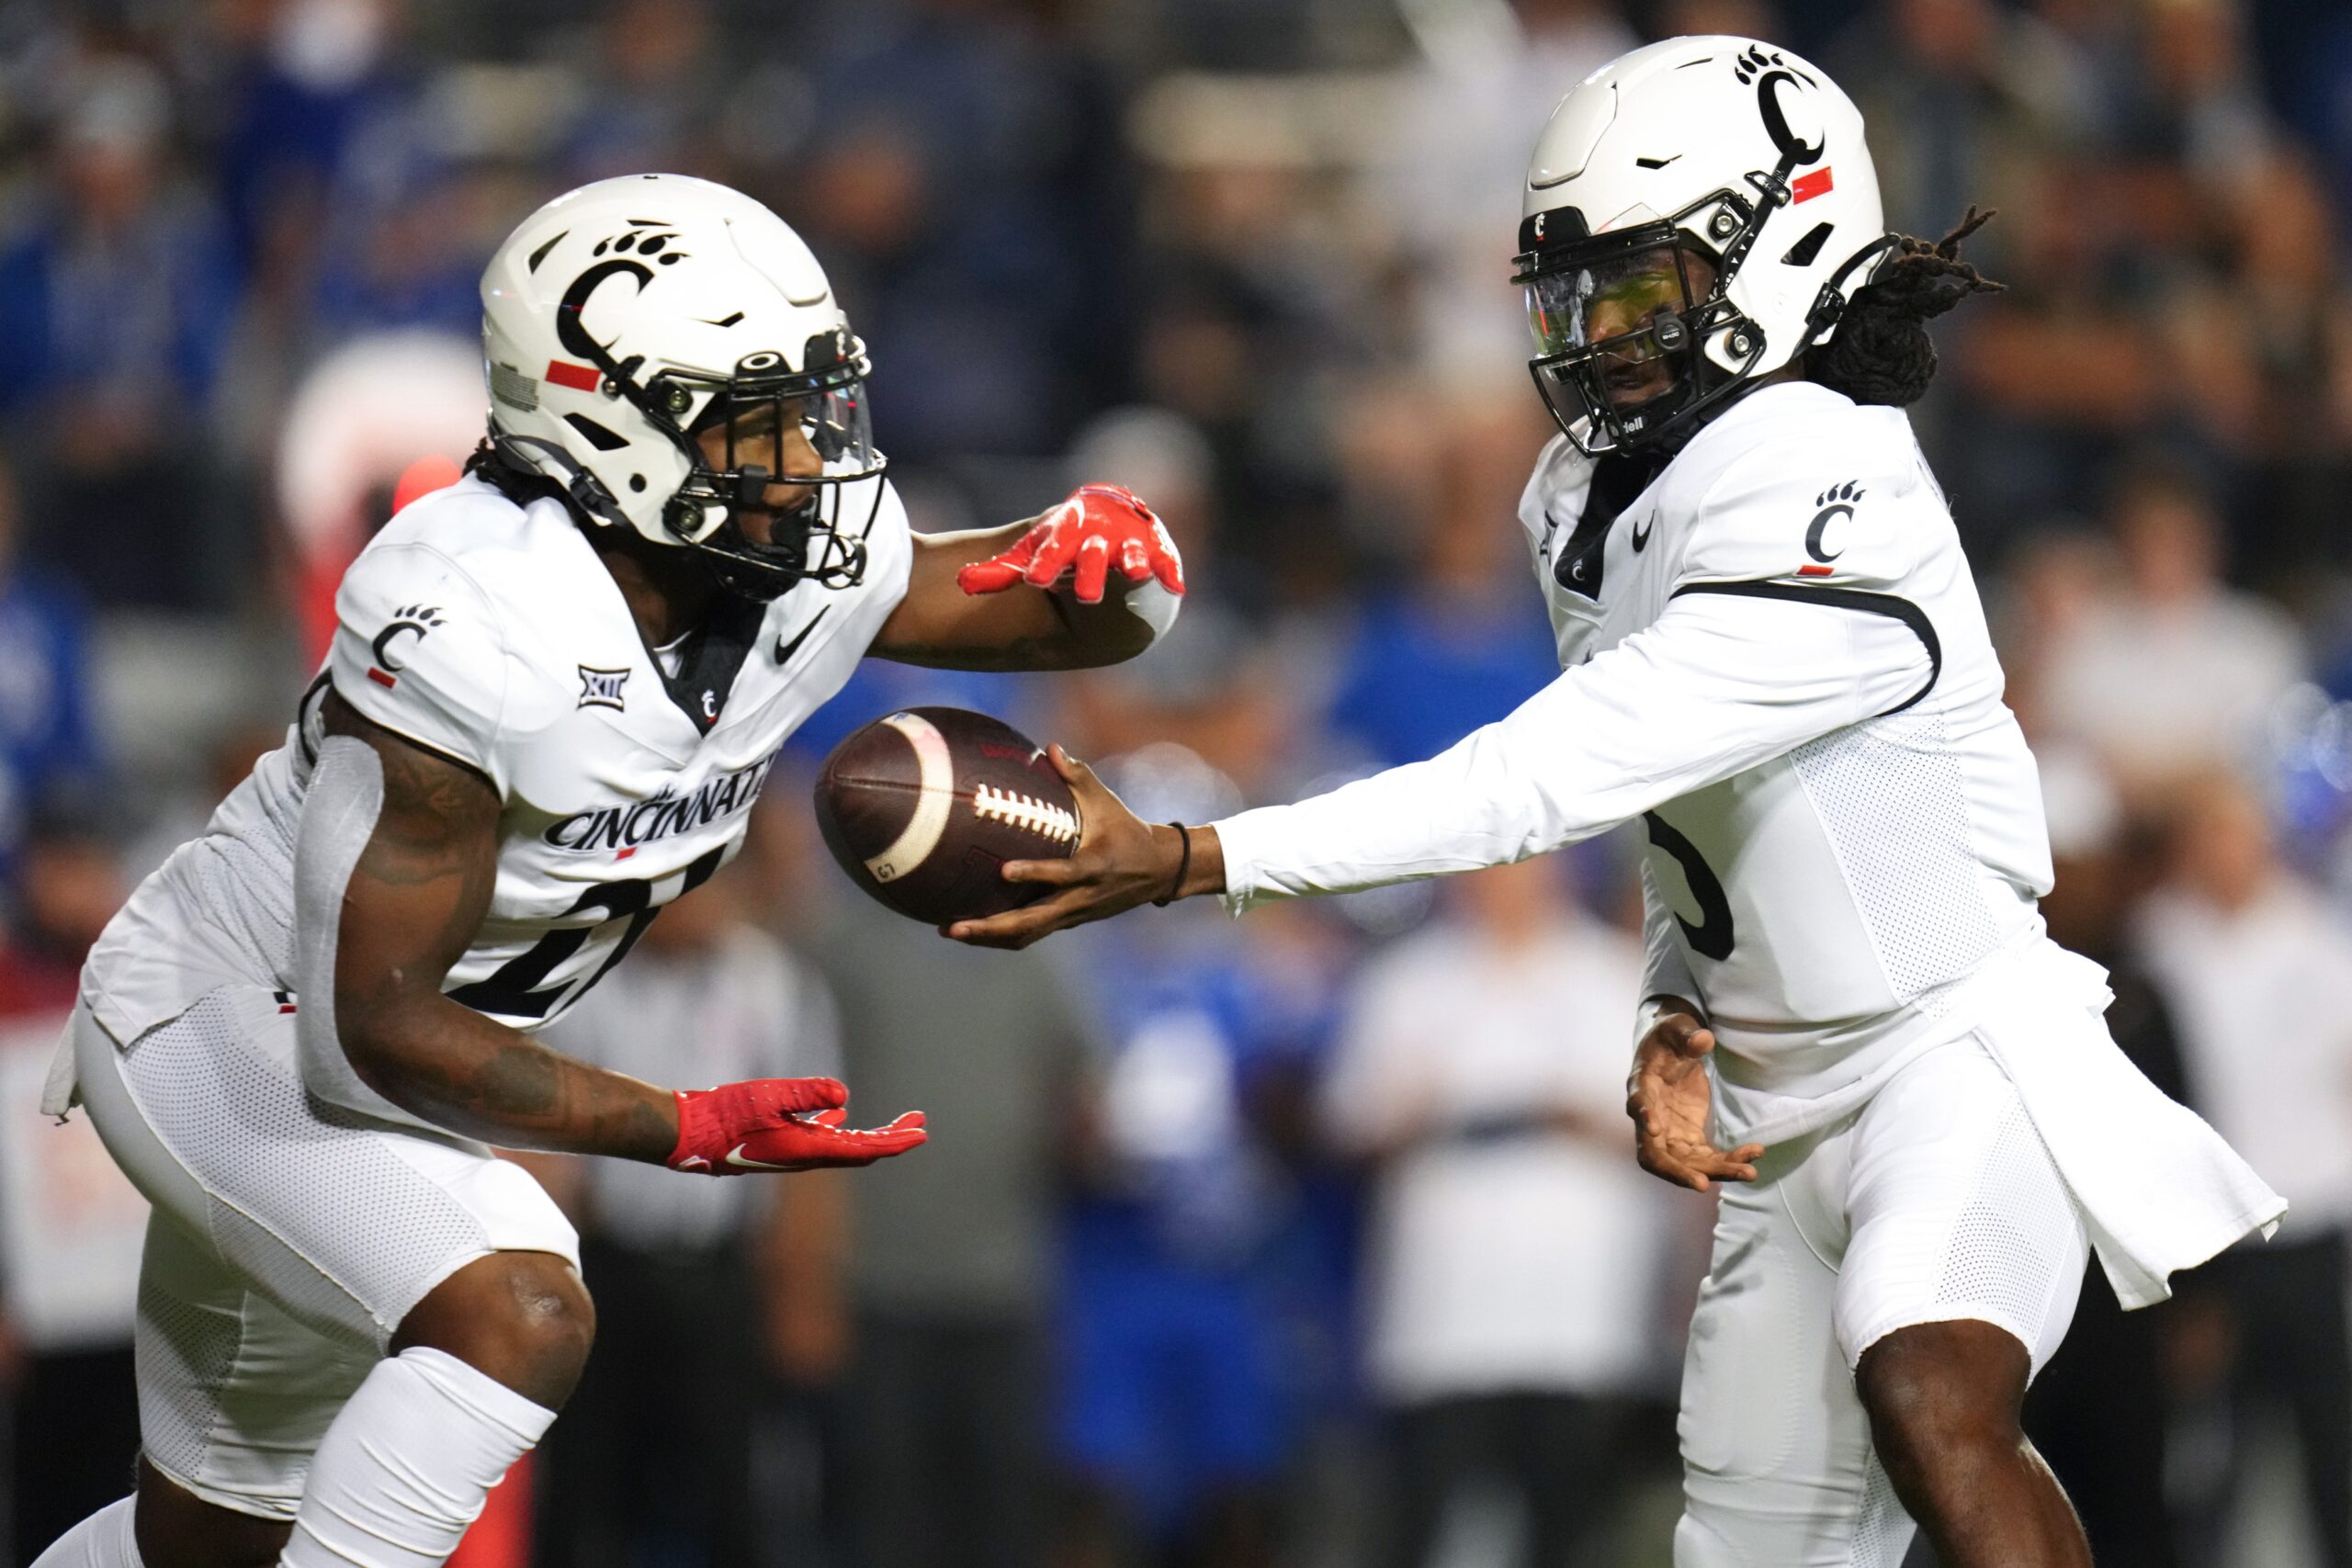 Cincinnati went to Utah Friday night for a conference game against BYU. Crucial turnovers led to the Bearcats dropping their third straight.